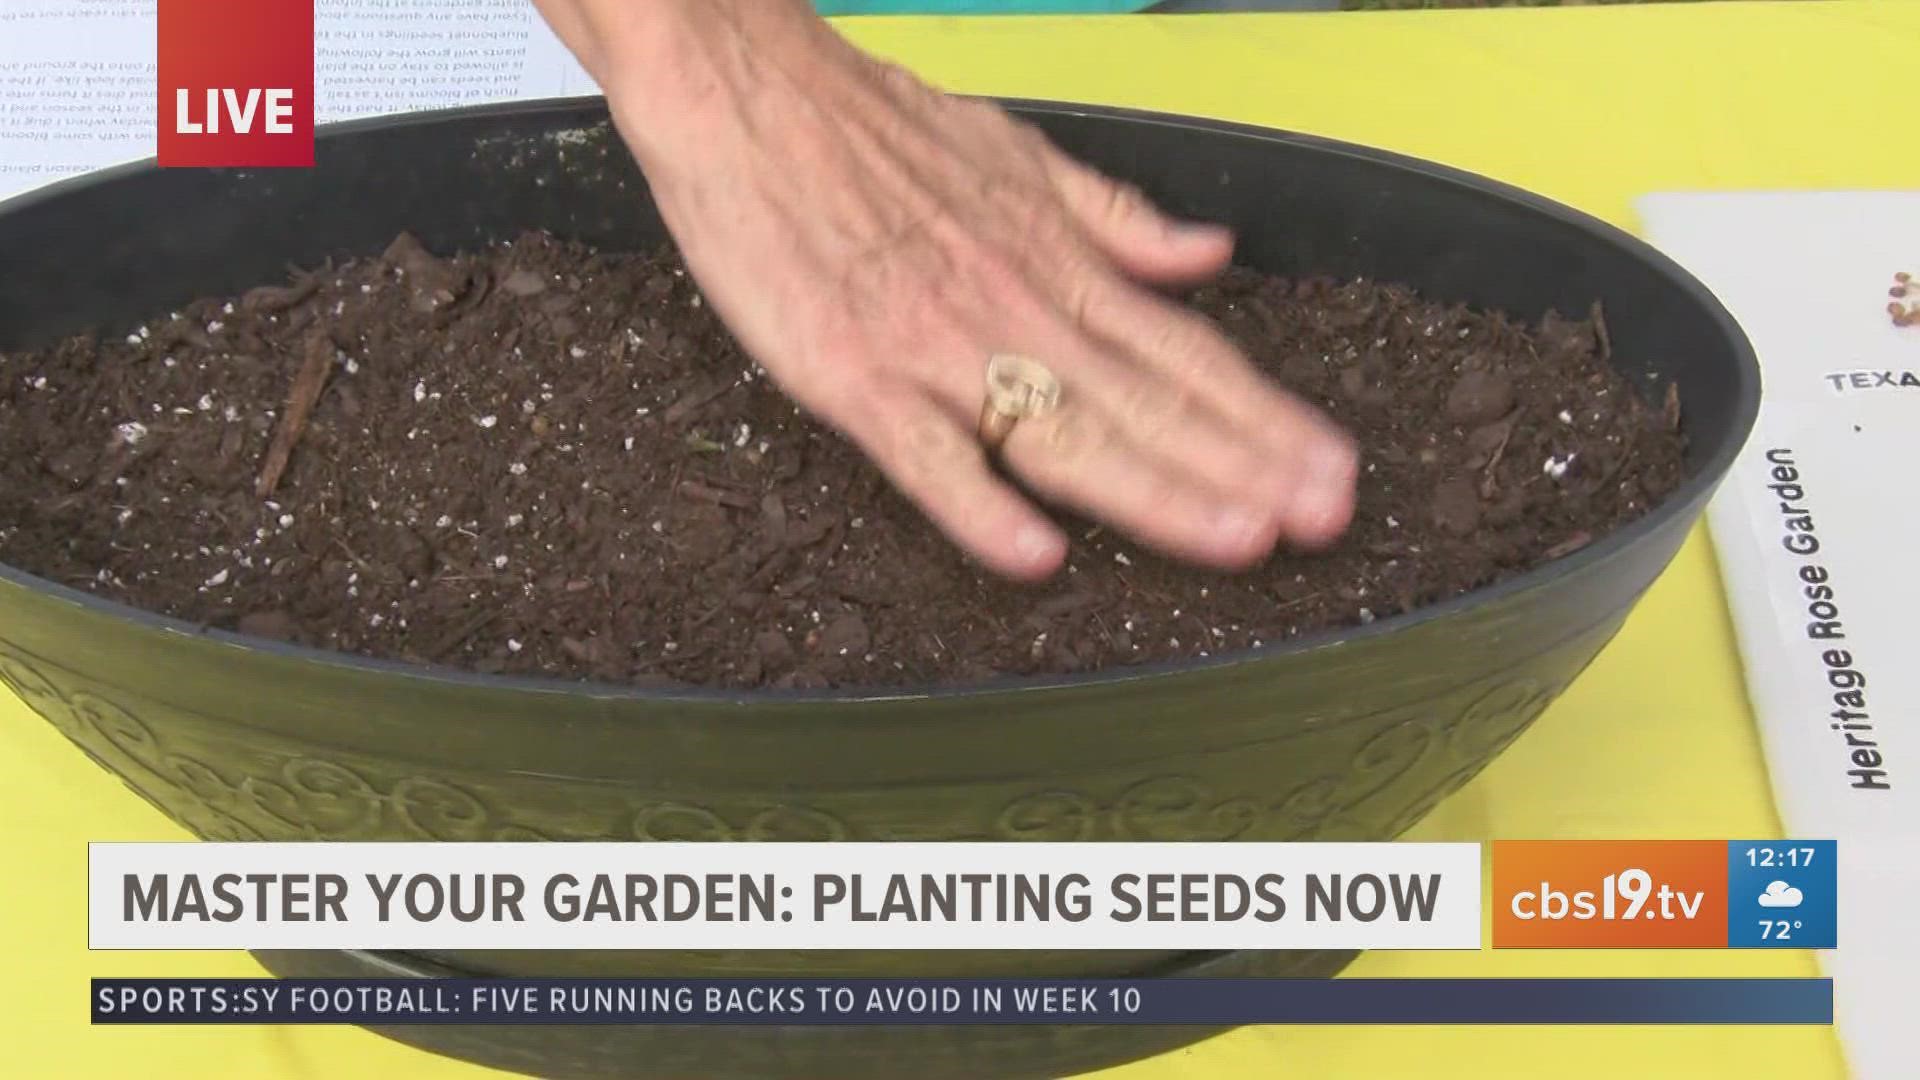 Smith County Master Garden explains what seeds to plant now and how to properly spread them on to the soil